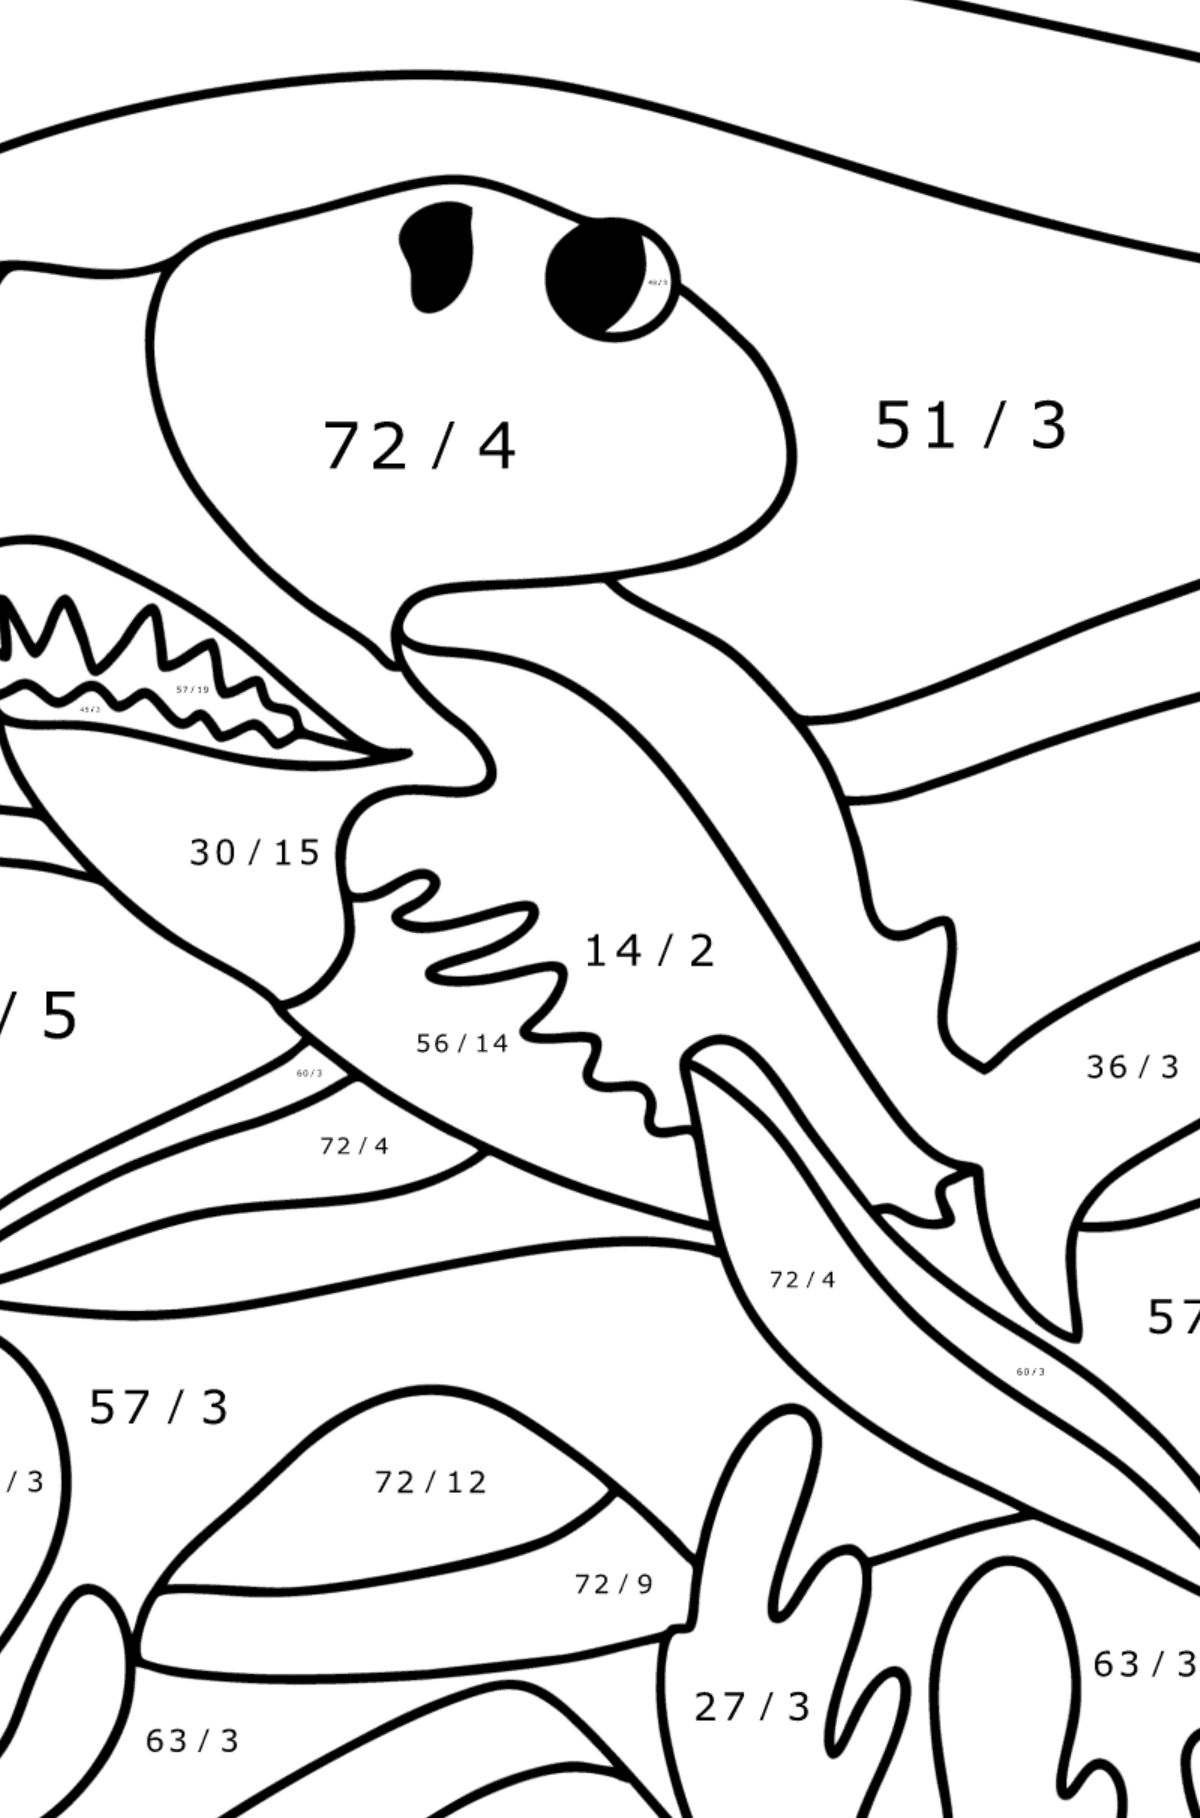 Hammerhead shark coloring page - Math Coloring - Division for Kids